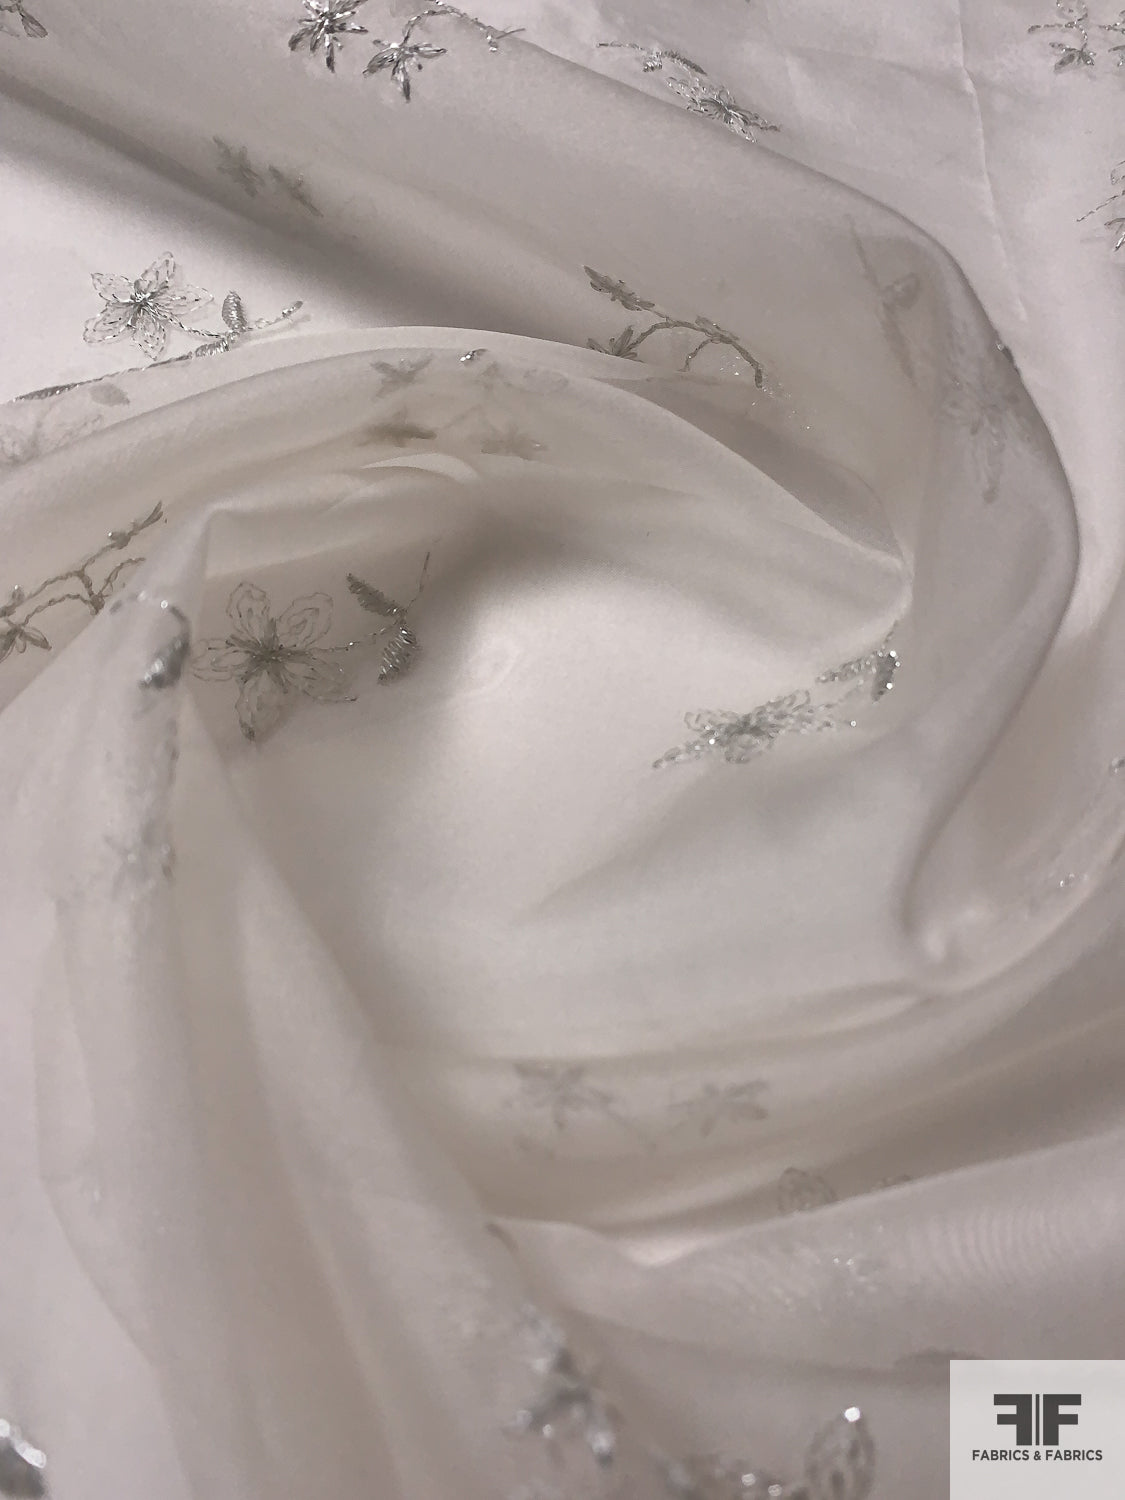 Floral Embroidered Silk Organza with Lurex Detailing - Off-White / White / Silver